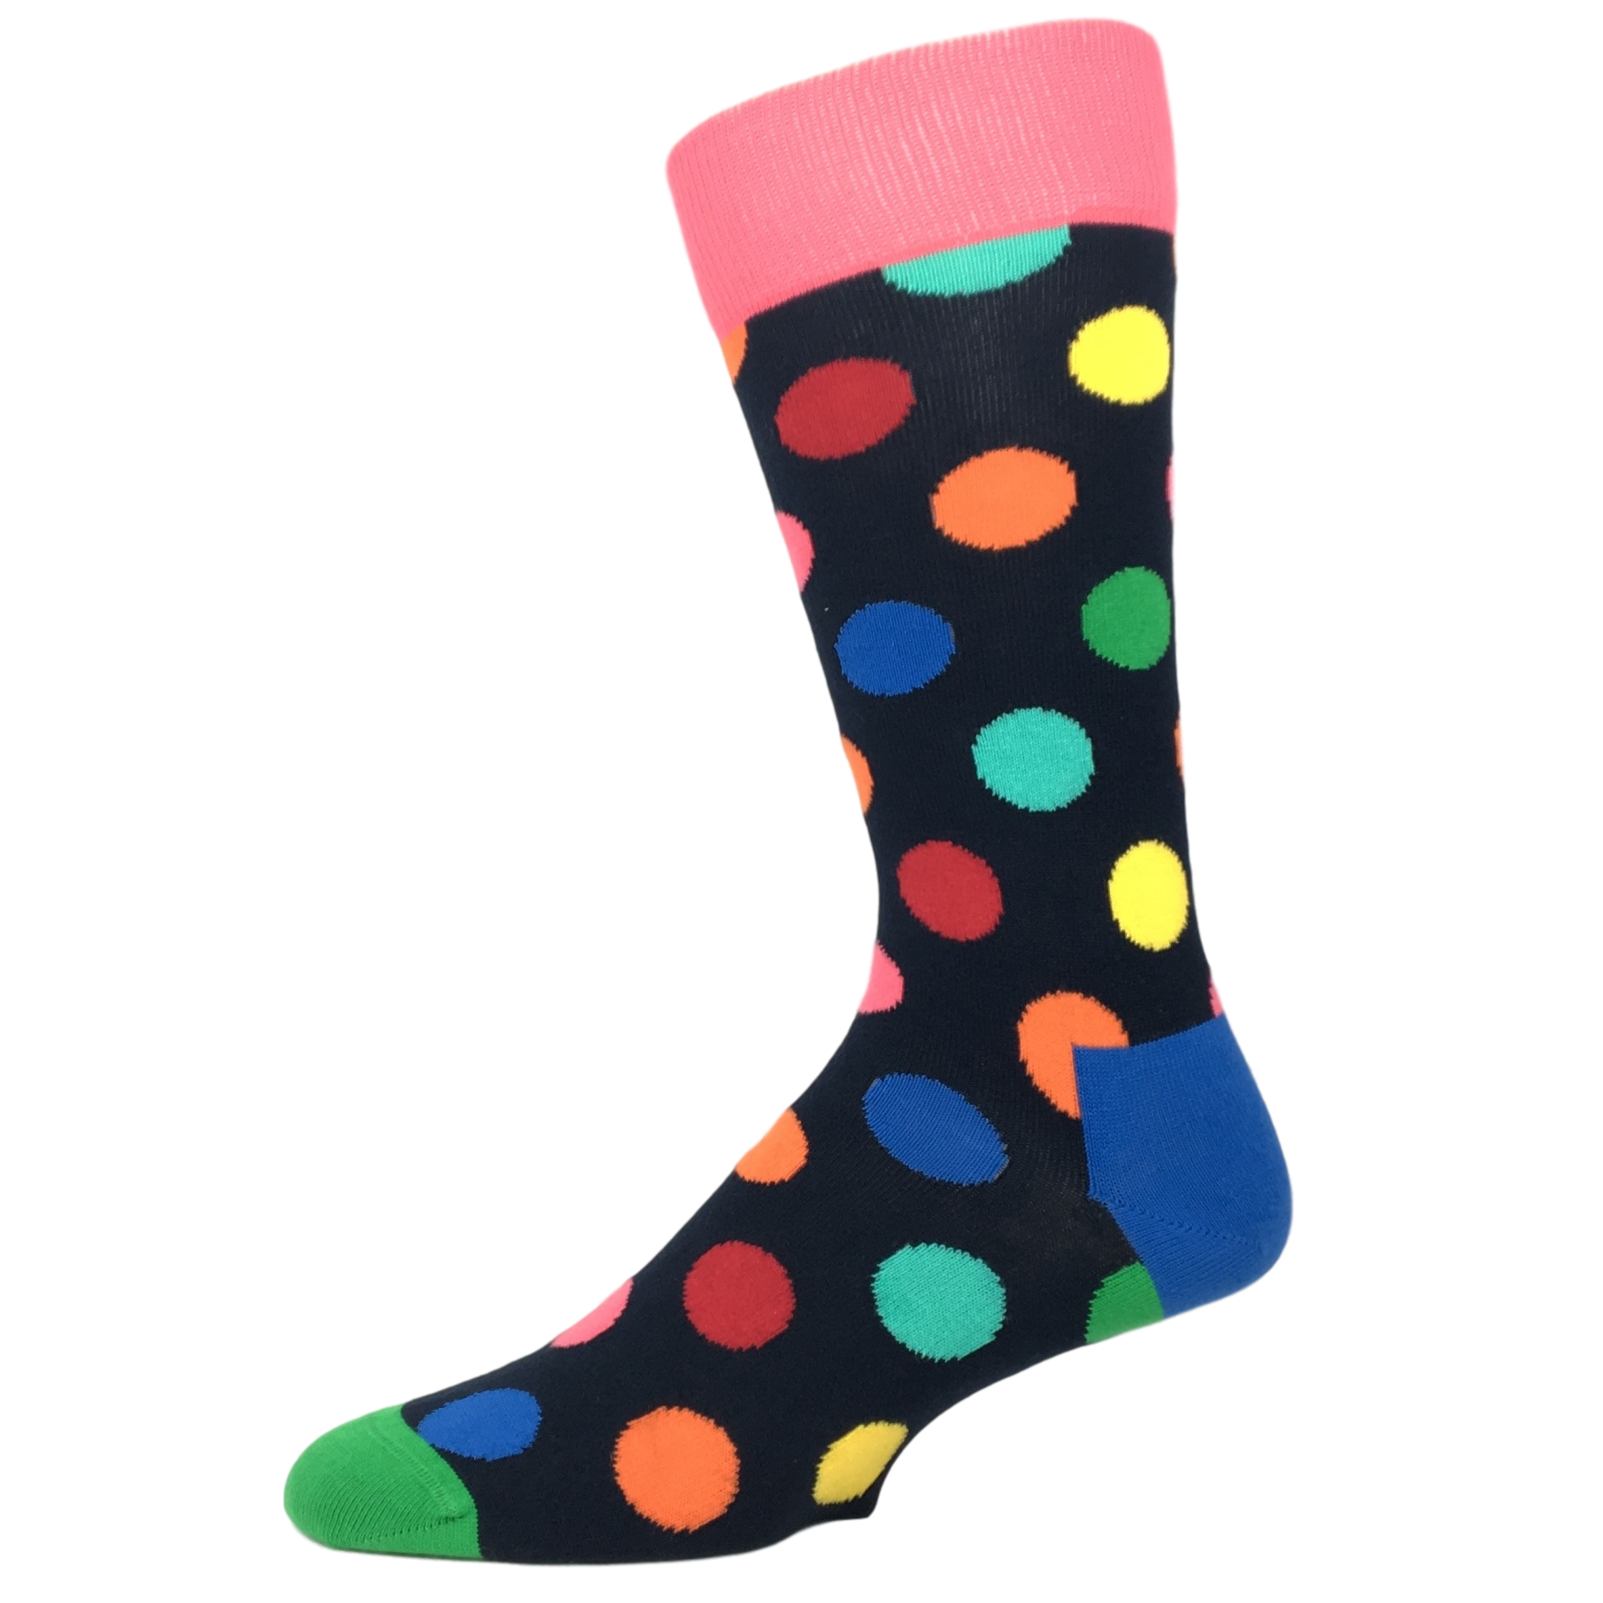 Red, Green, and Blue Multi Colored Big Dot Socks by Happy Socks